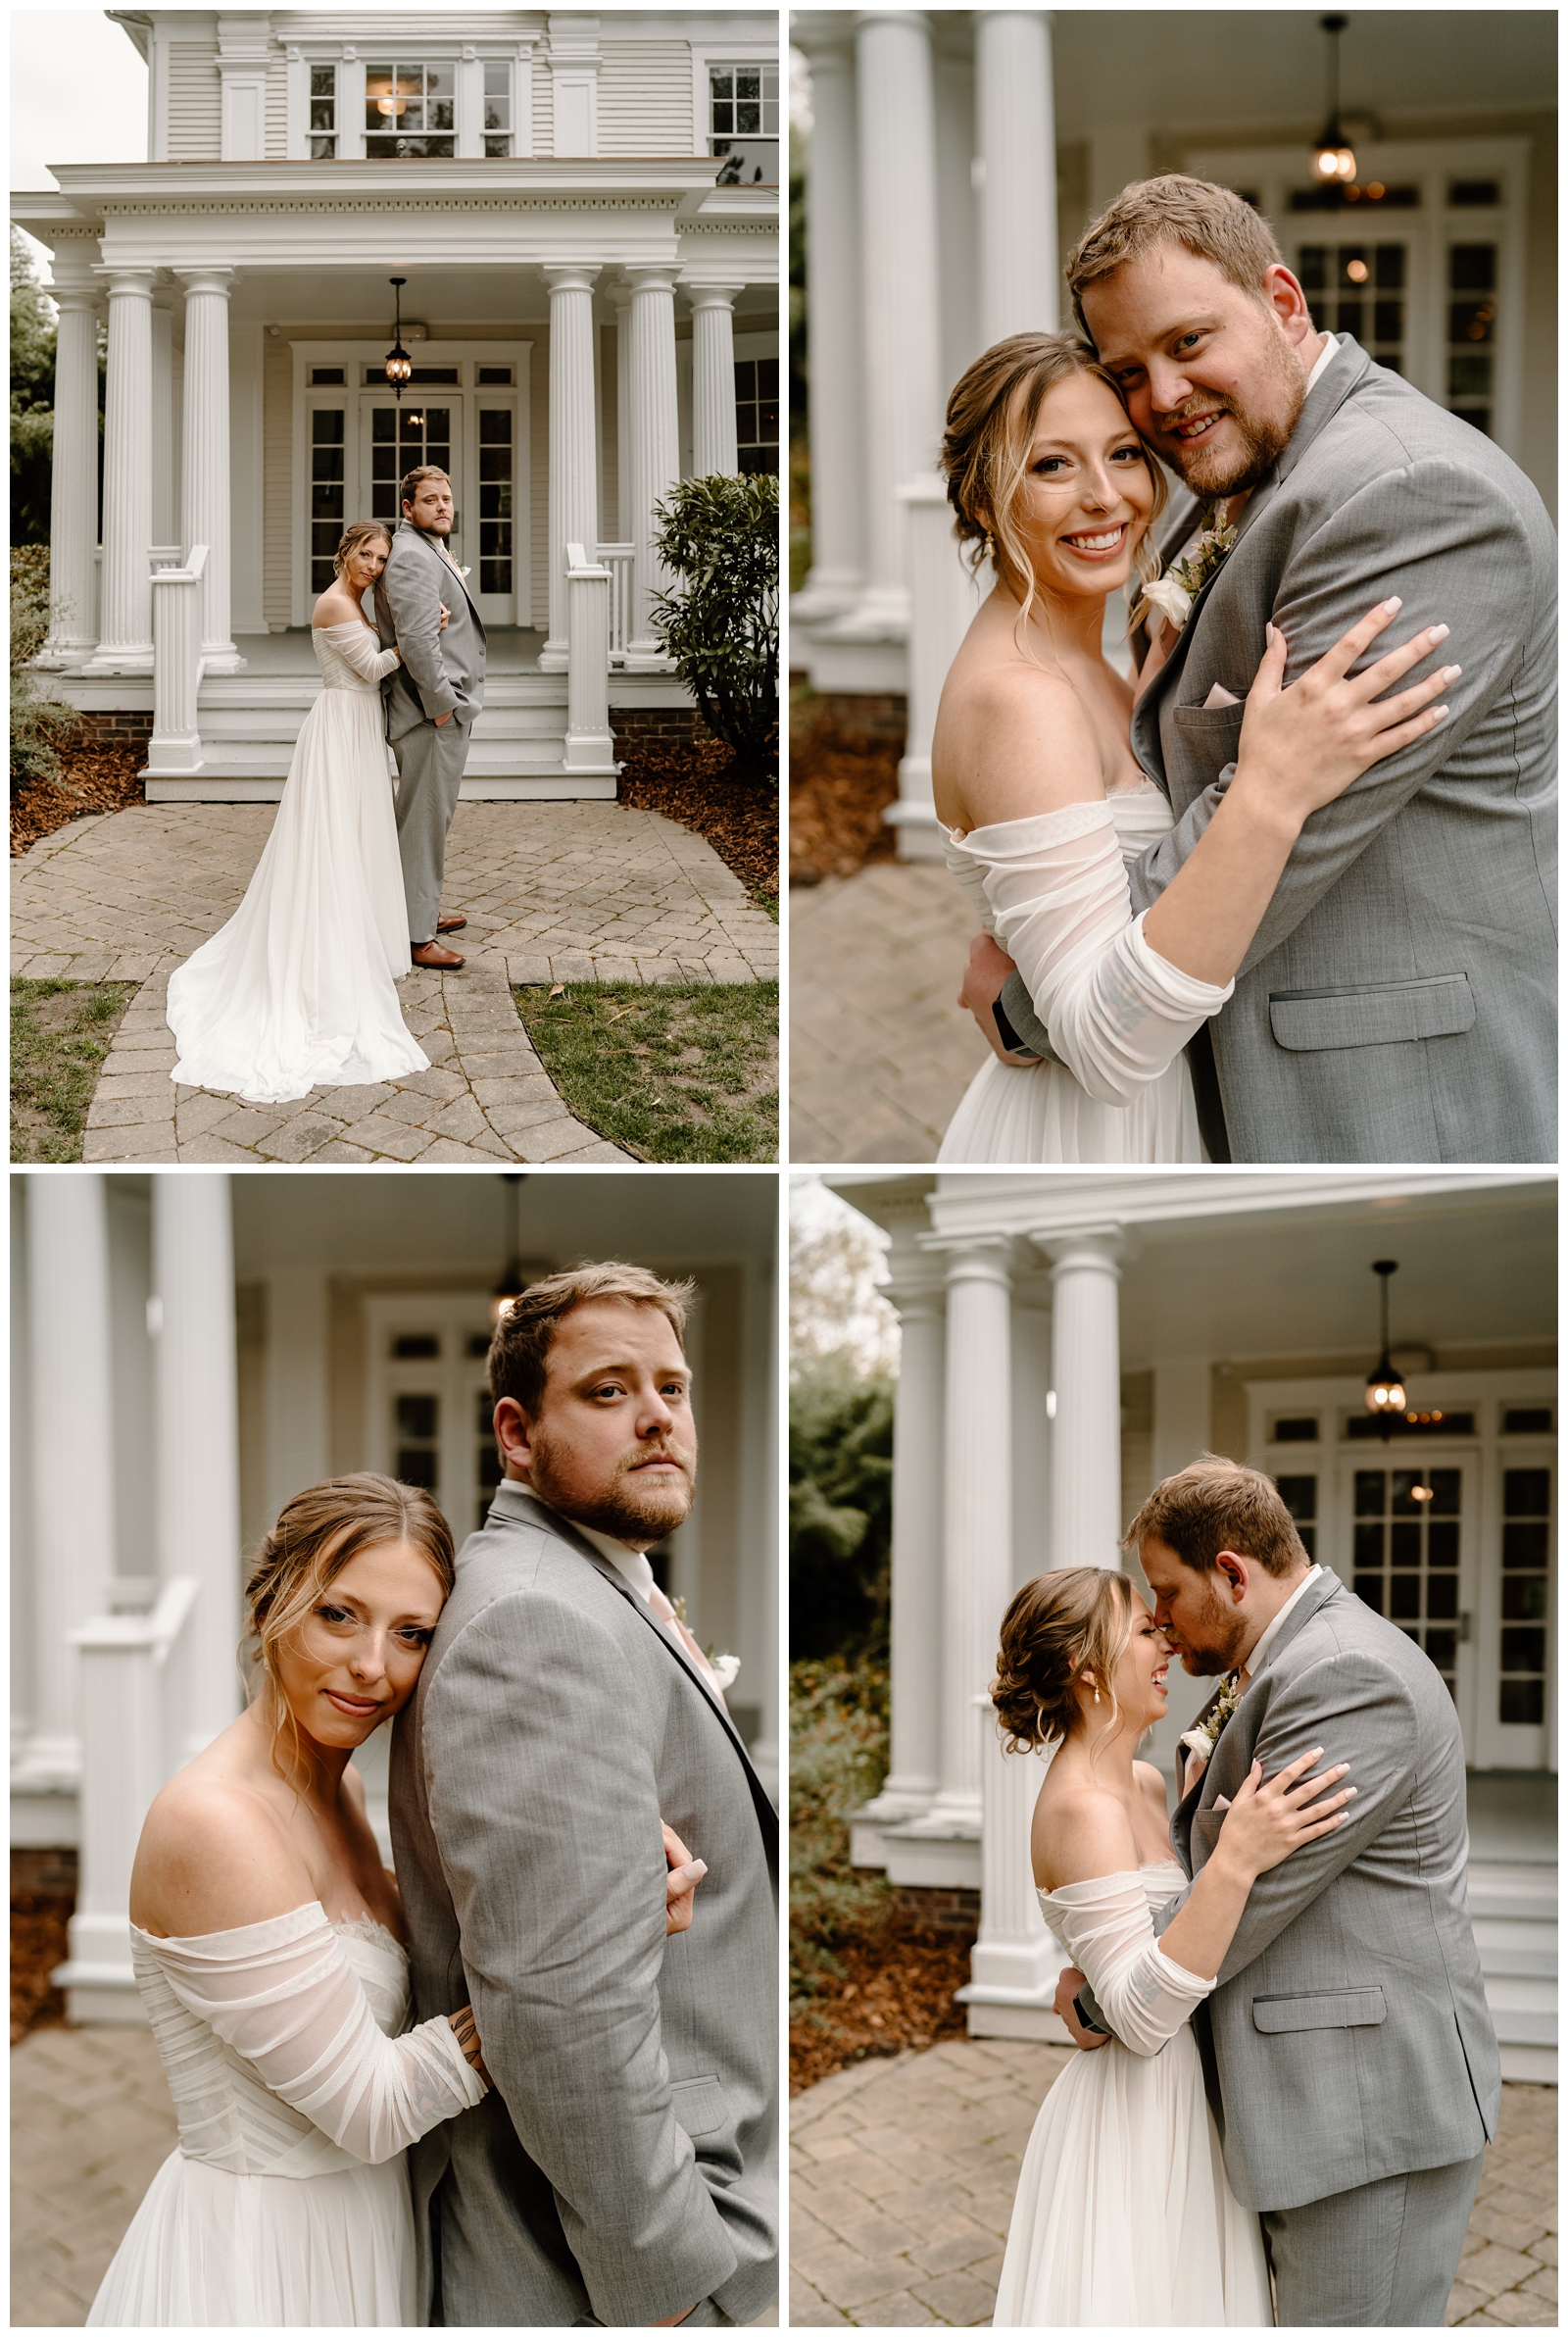 Sweet and intimate newlywed portraits in downtown Greensboro, NC at the McAlister-Leftwich House by Raleigh and Charlotte wedding photographer